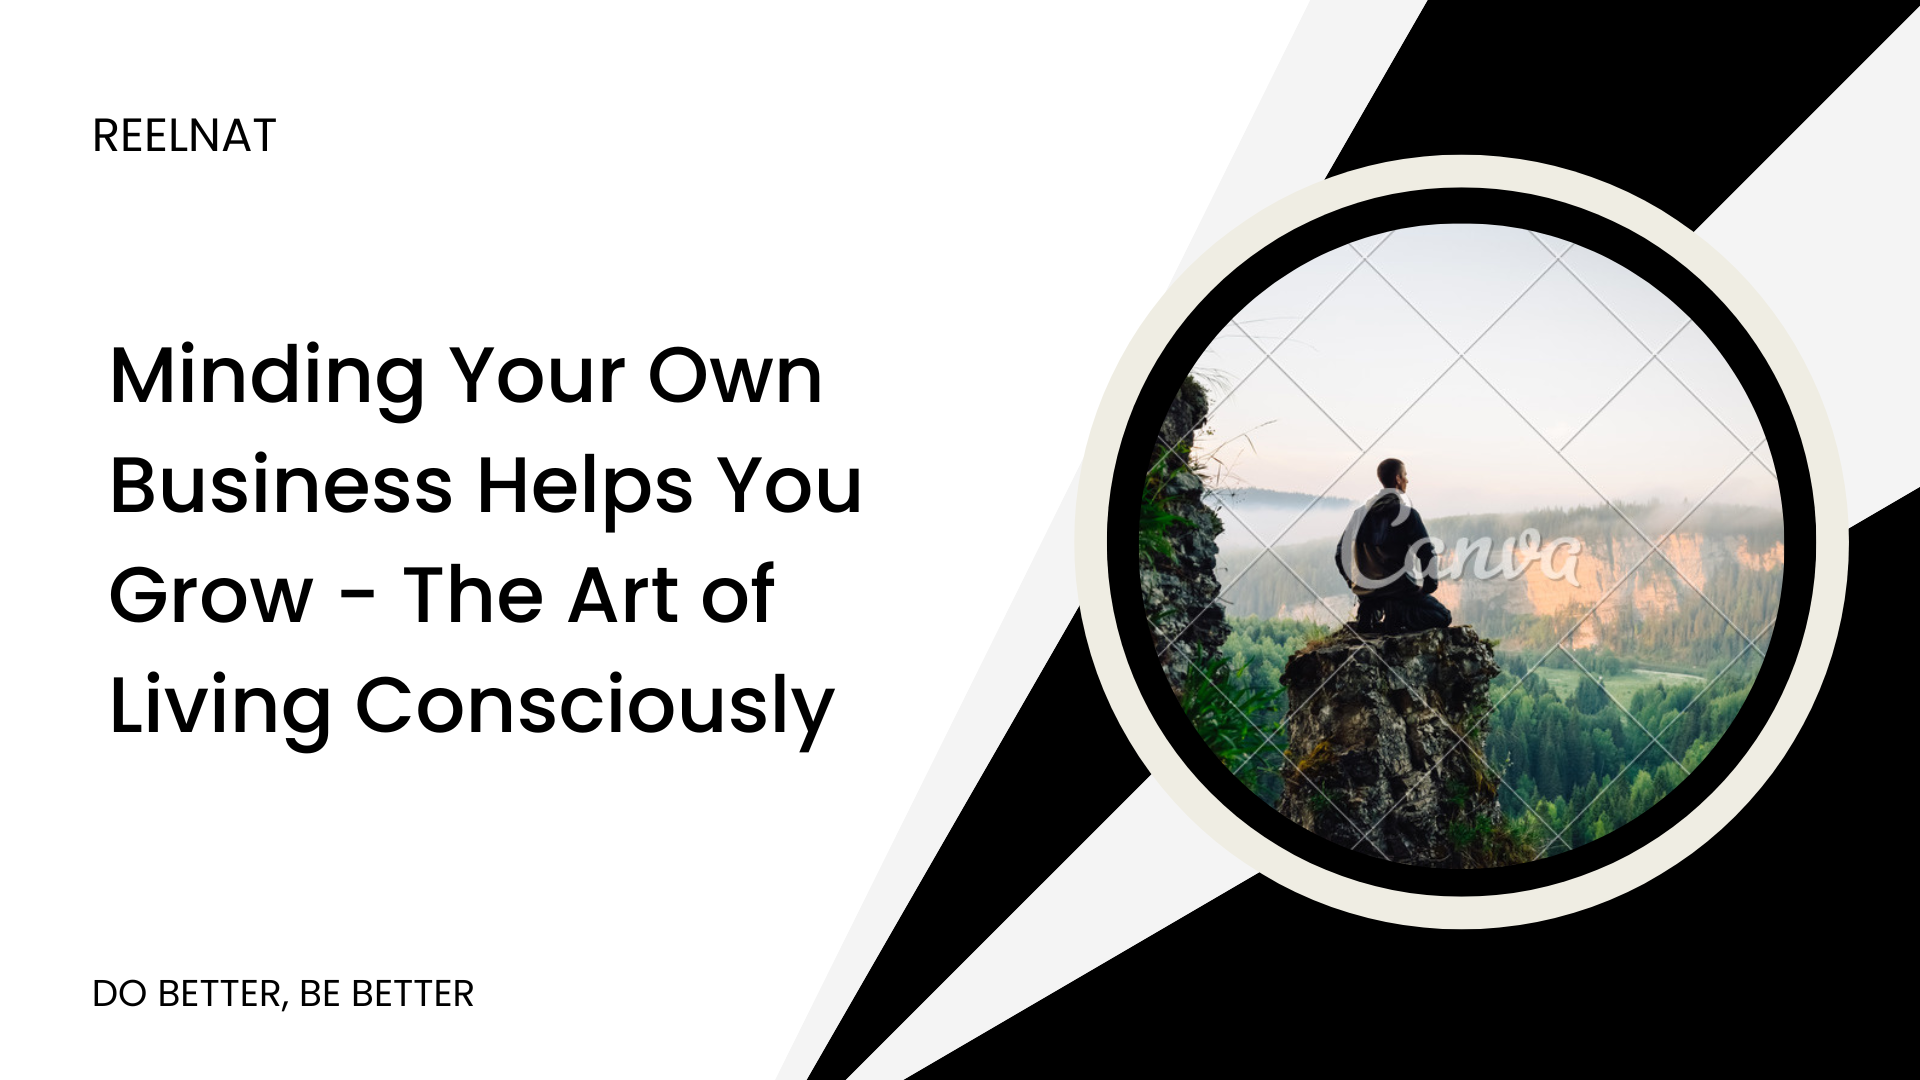 Minding Your Own Business Helps You Grow – The Art of Living Consciously